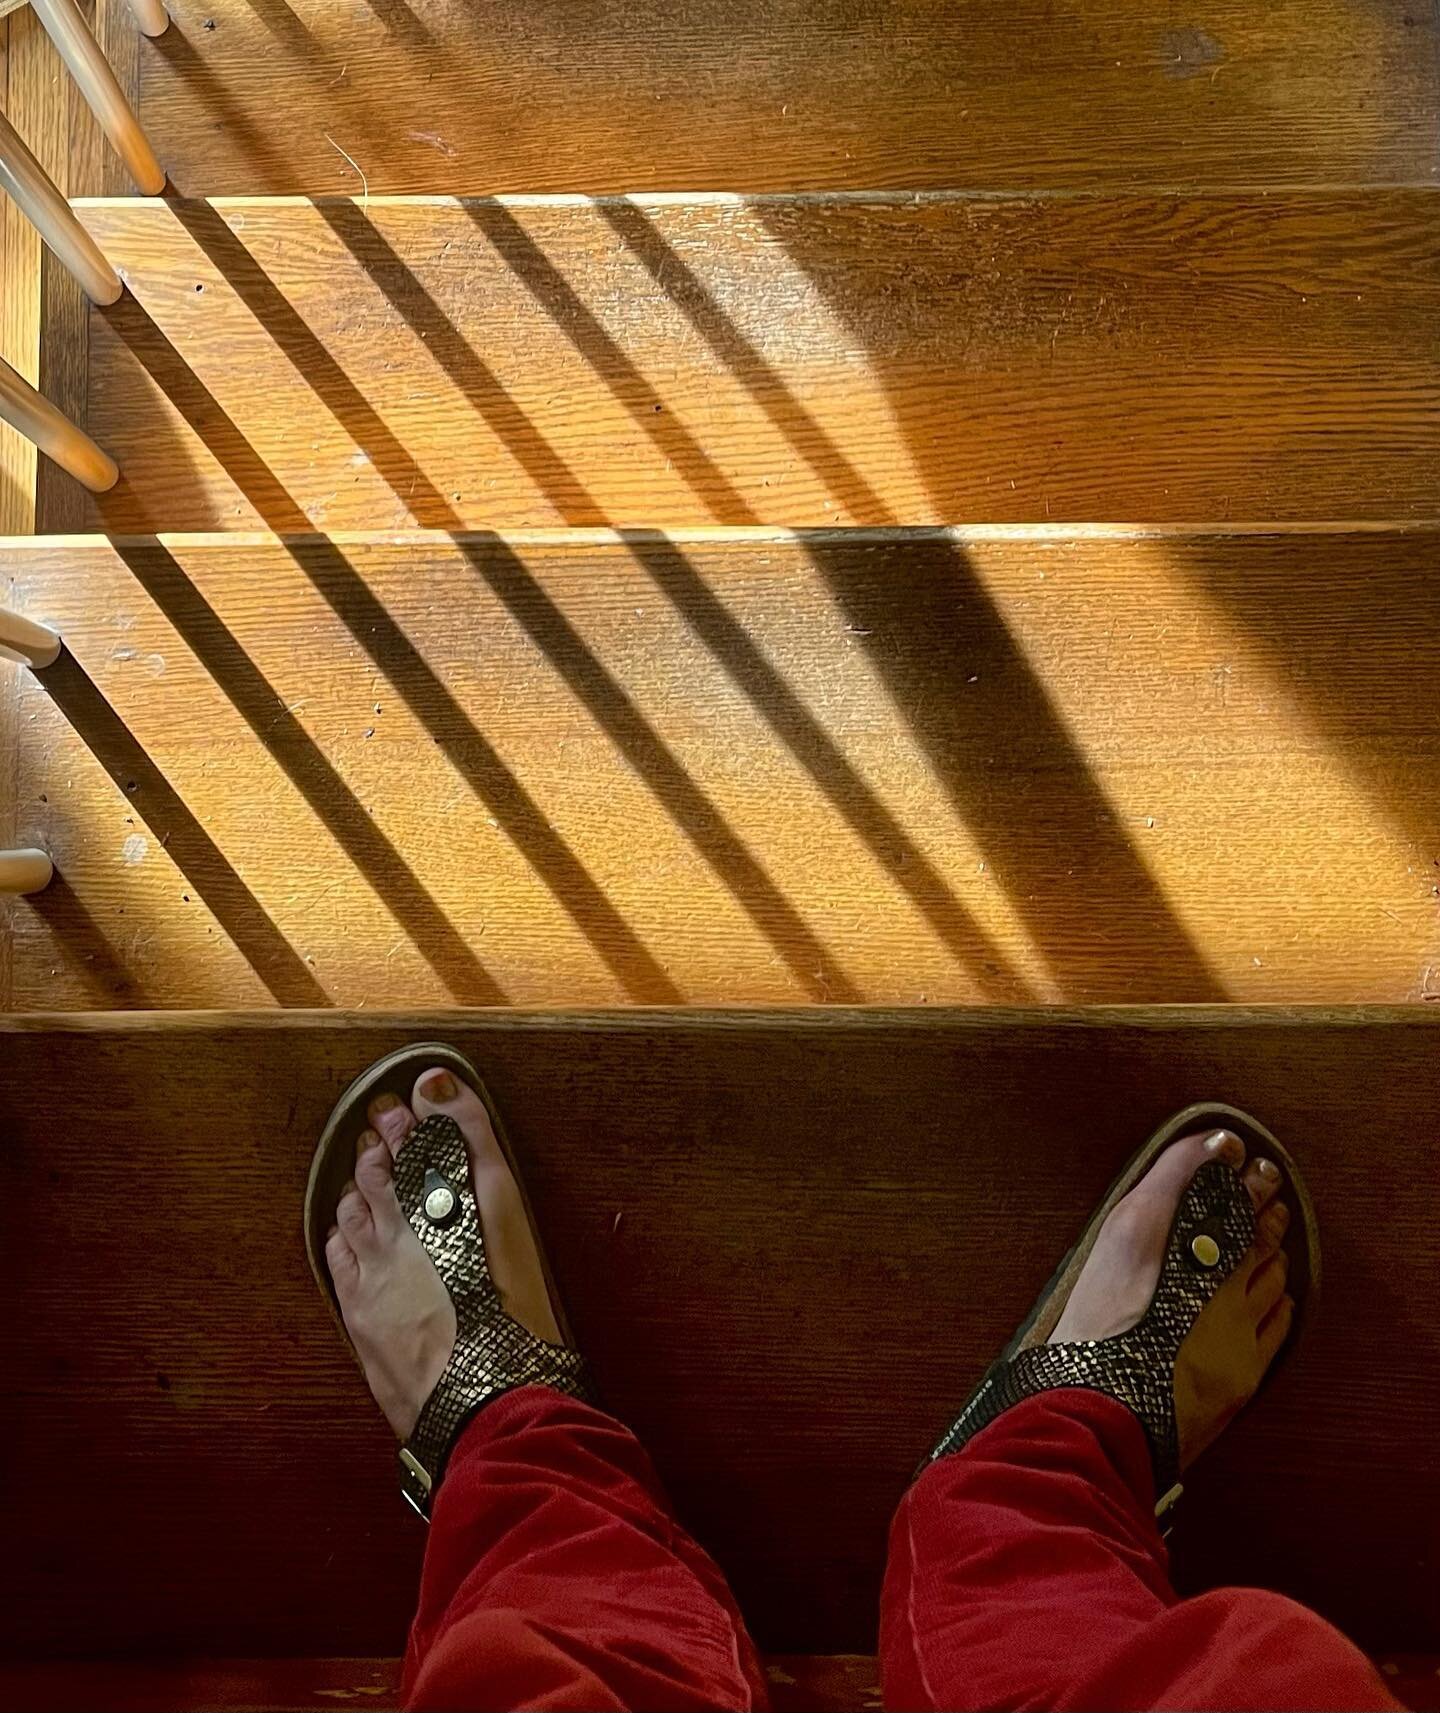 The light this time of year hits in surprising ways, from the stairs to the sandal to the toe polish. It&rsquo;s only 2:30 and the sun is awfully close to the horizon so every little slice and drop is appreciated. #goandfindthelight